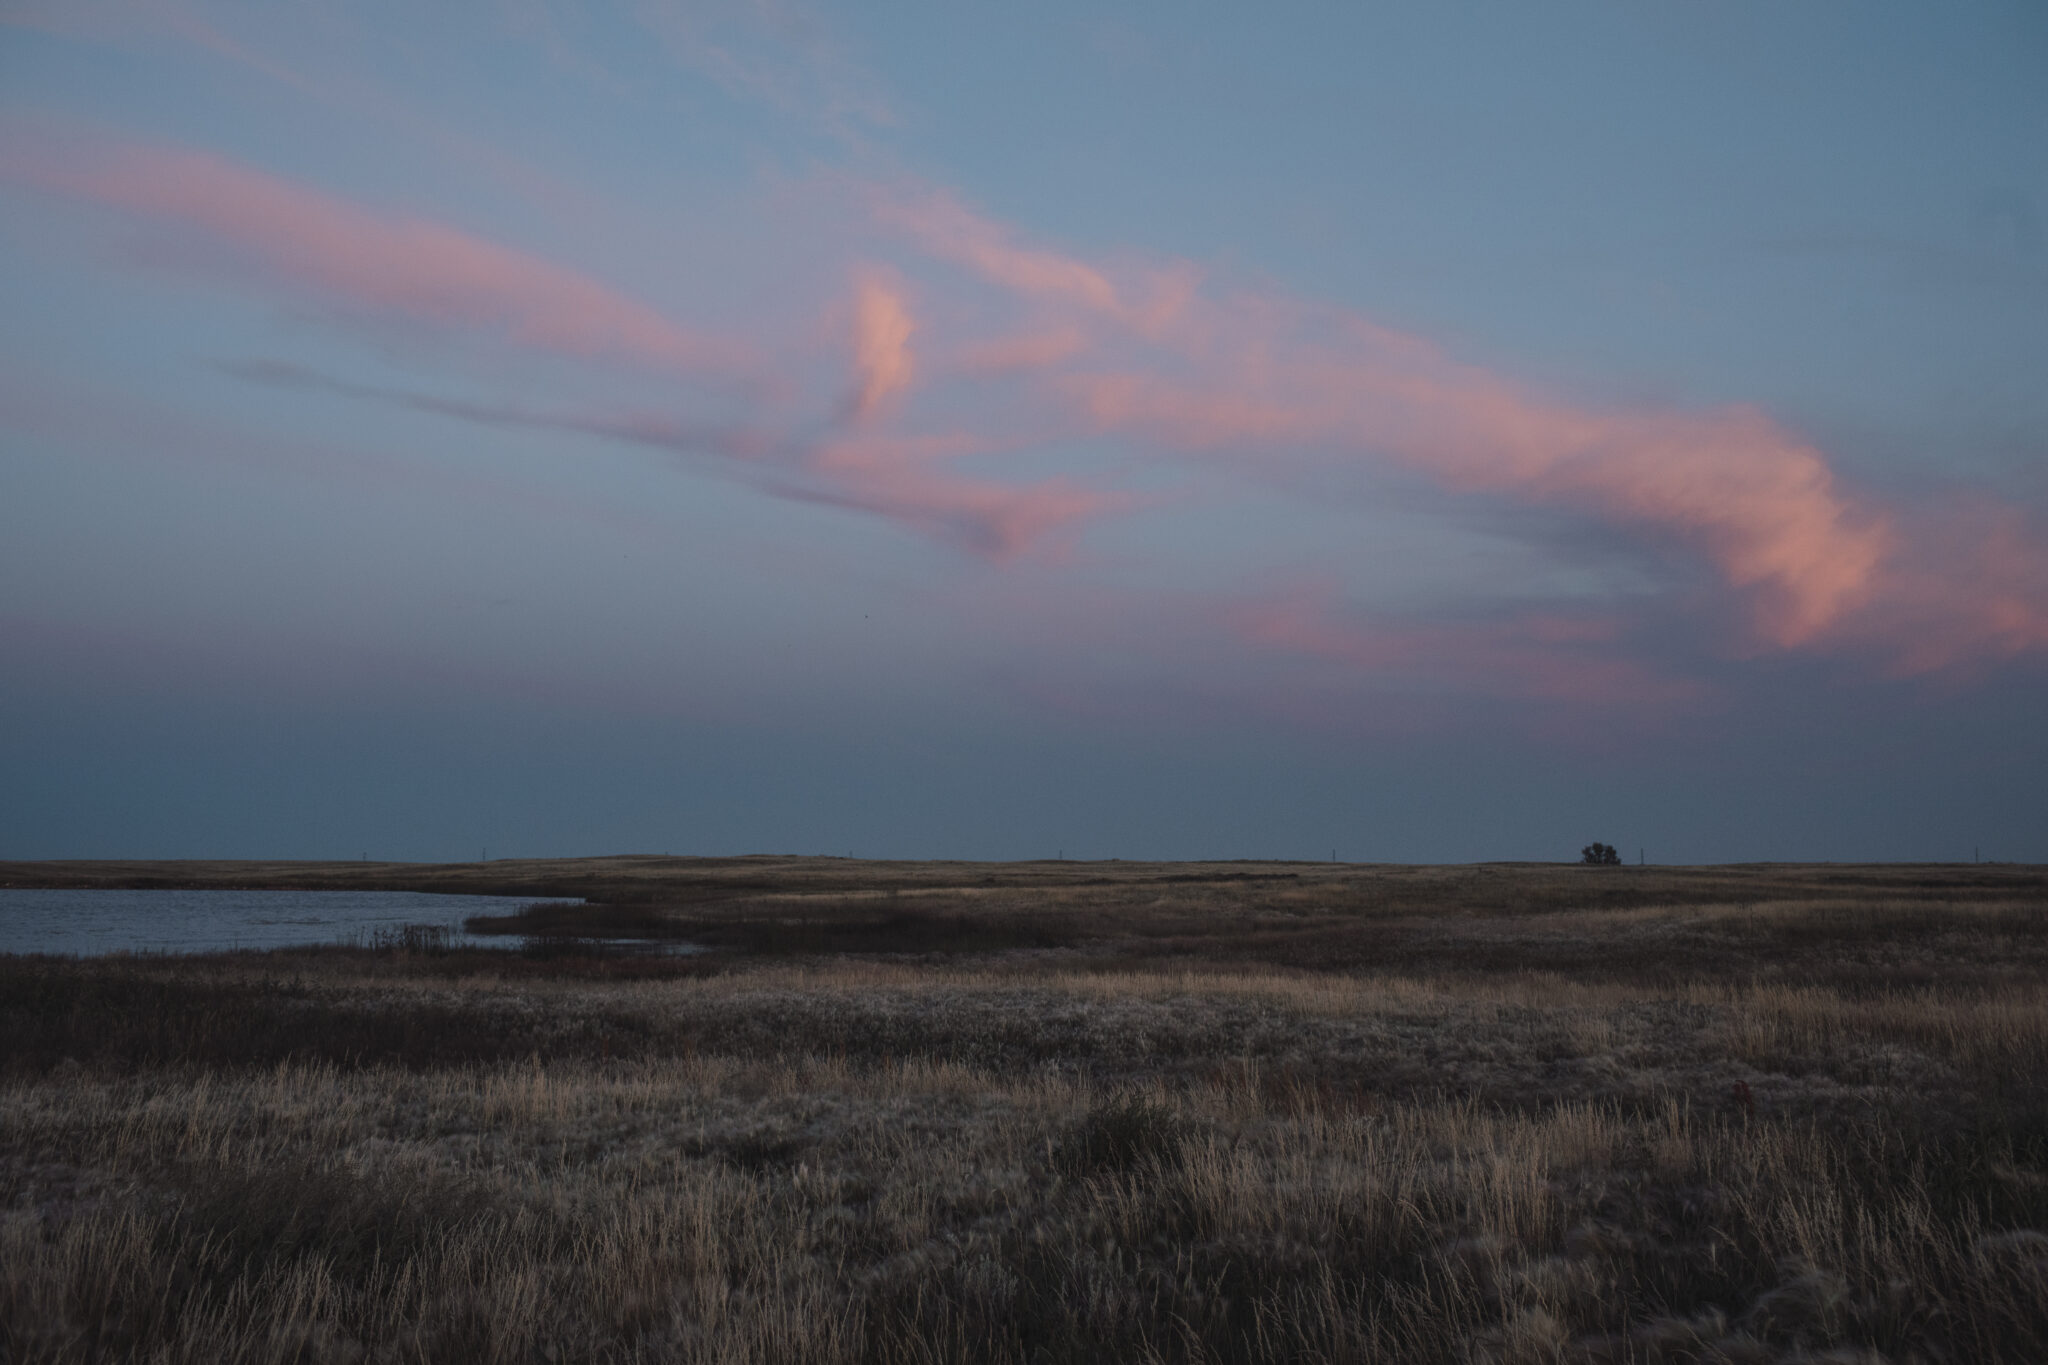 To be resilient against the climate crisis, Canada needs to protect its Prairie wetlands